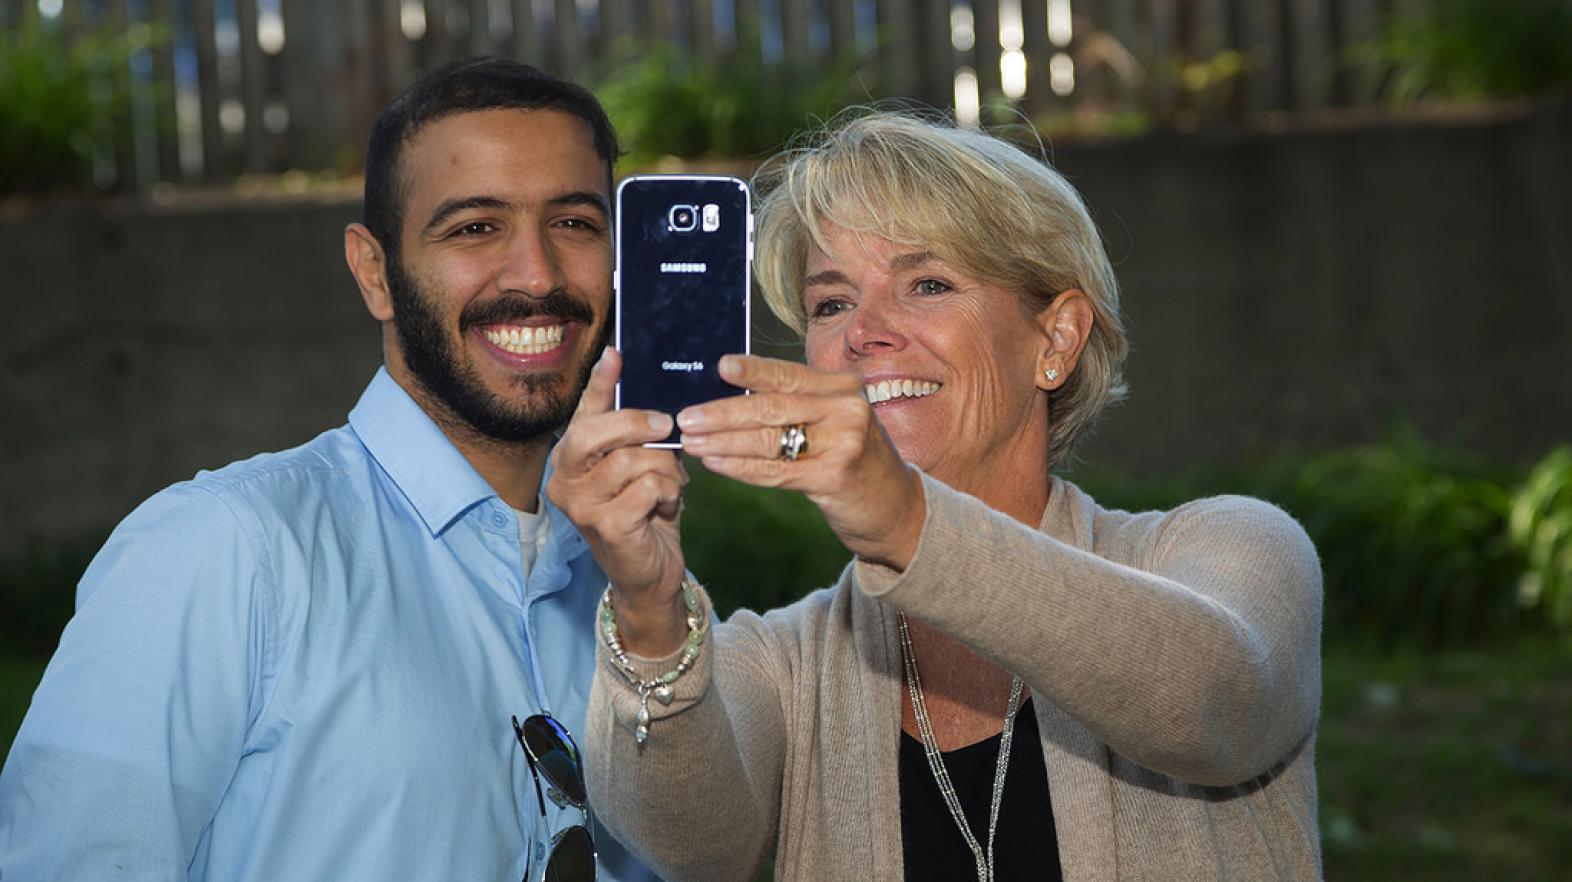 President Mary-Beth Cooper takes a selfie with a Springfield College student